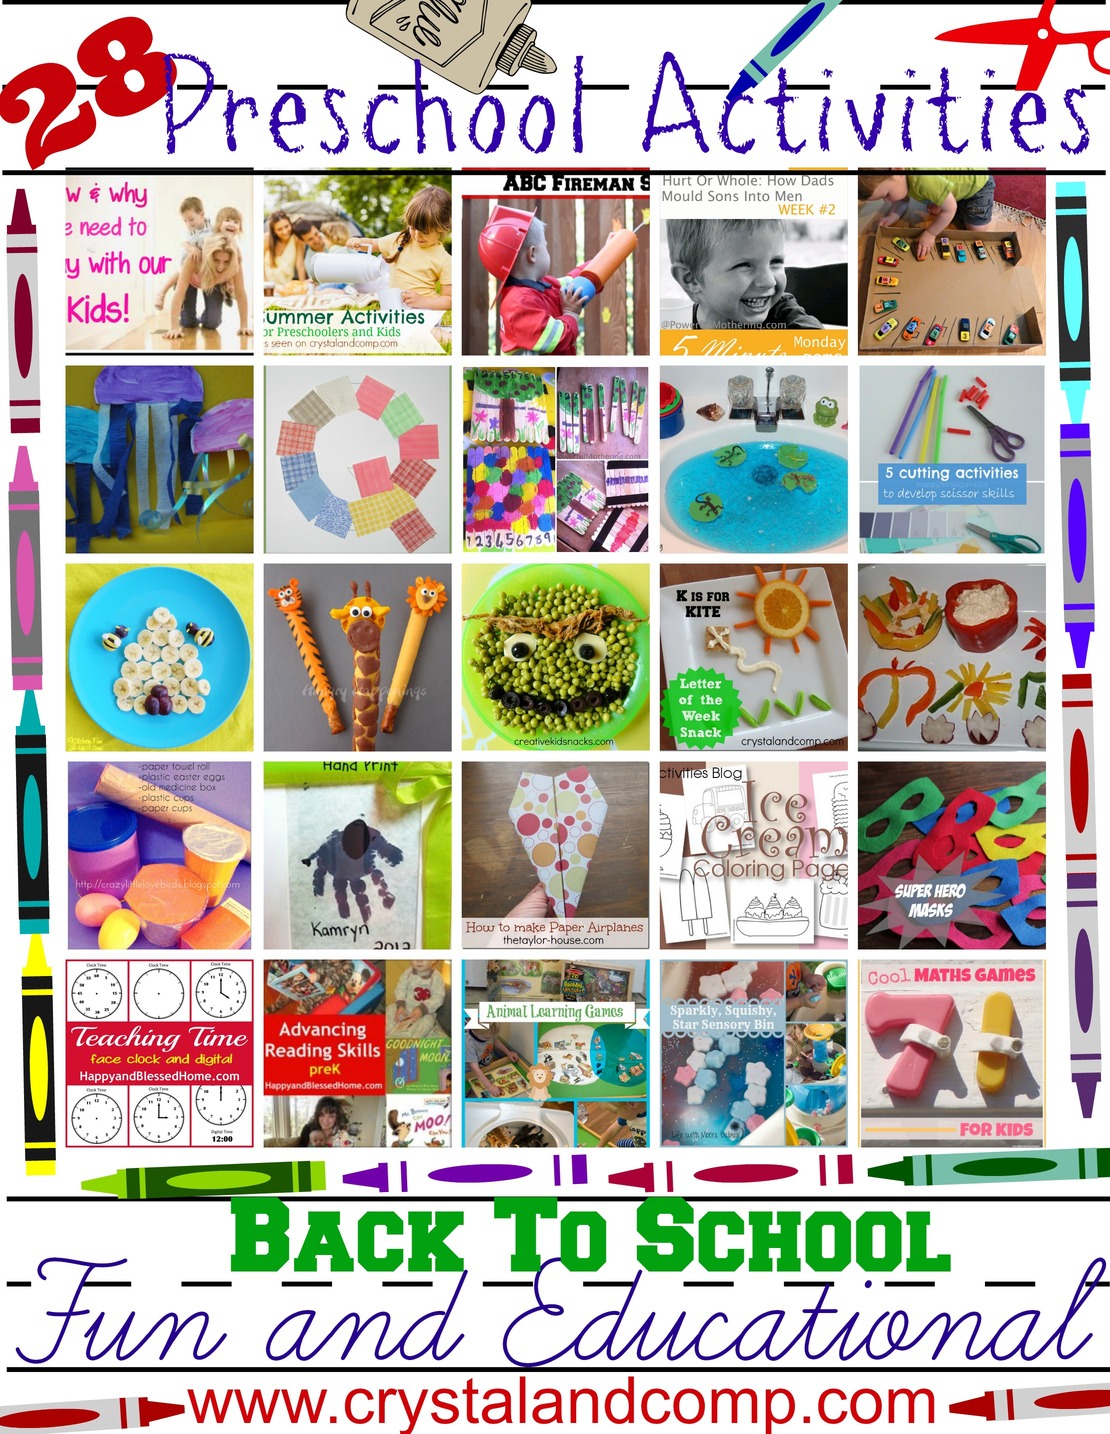 28-fun-and-educational-preschool-activities-for-back-to-school